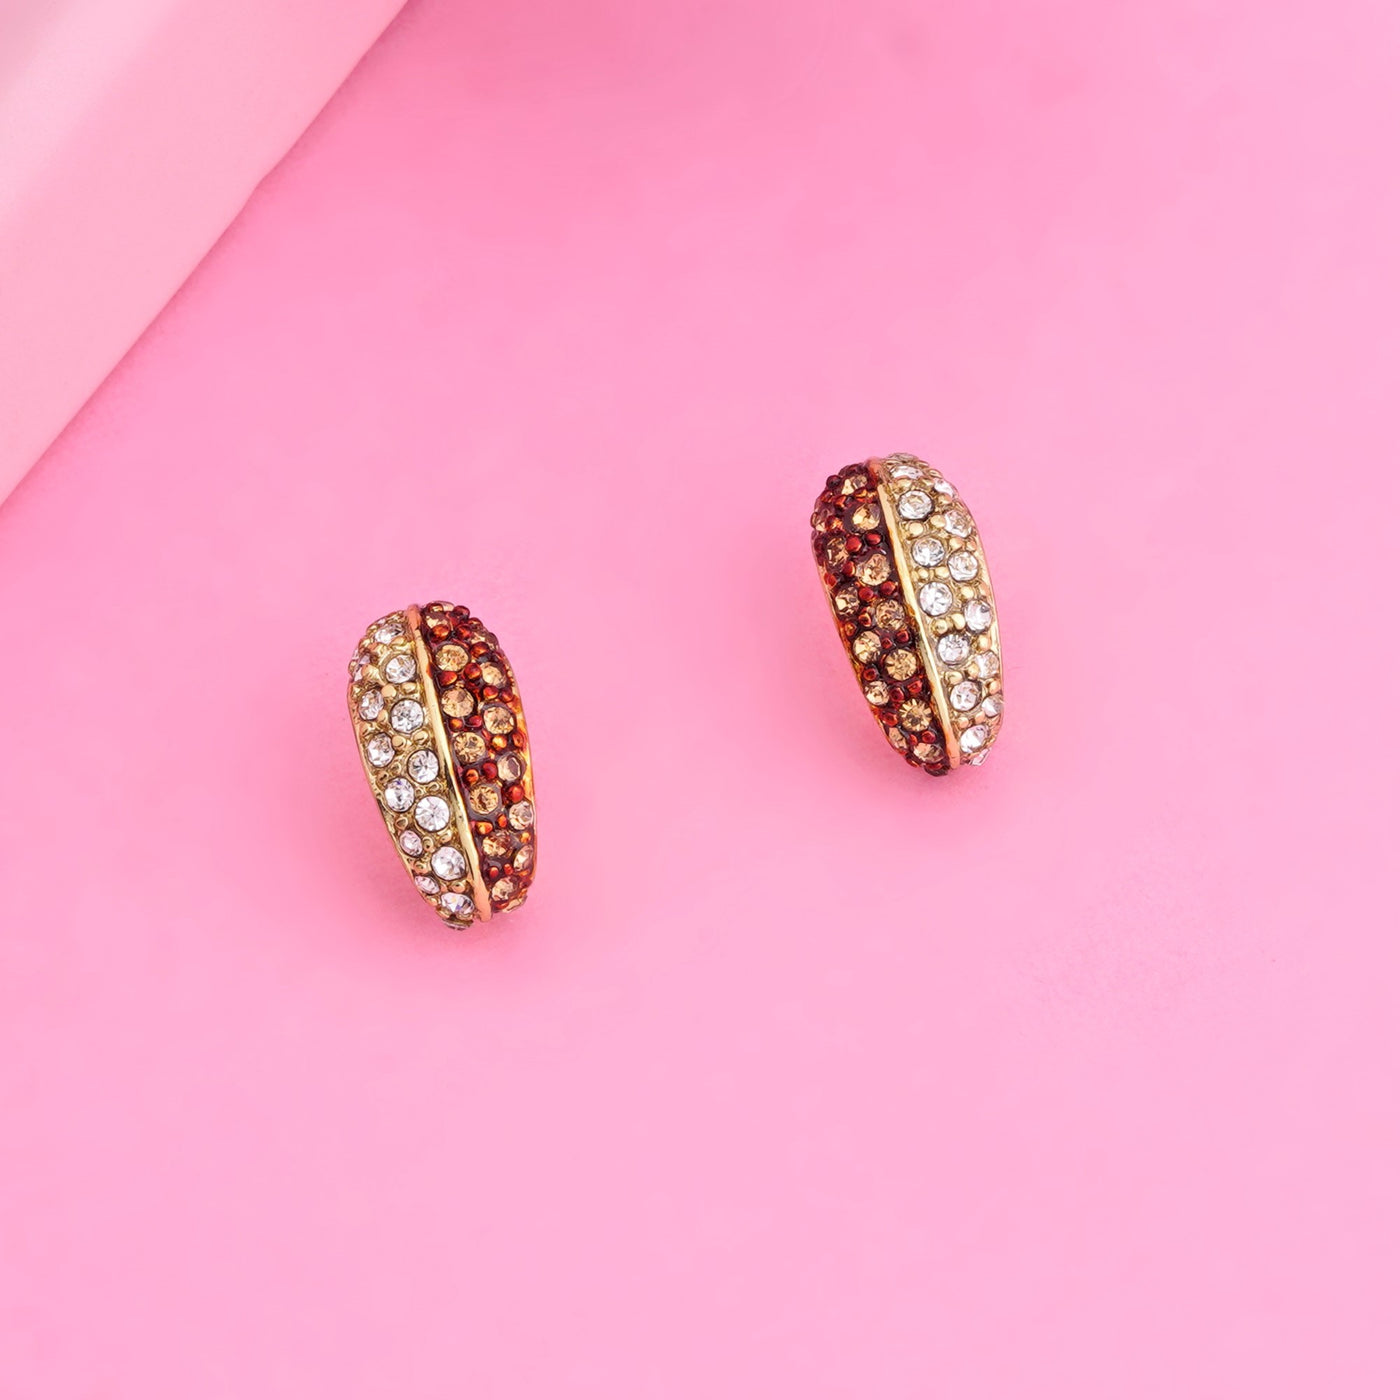 Gold Plated White Austrian Crystal Stone Stud Earrings